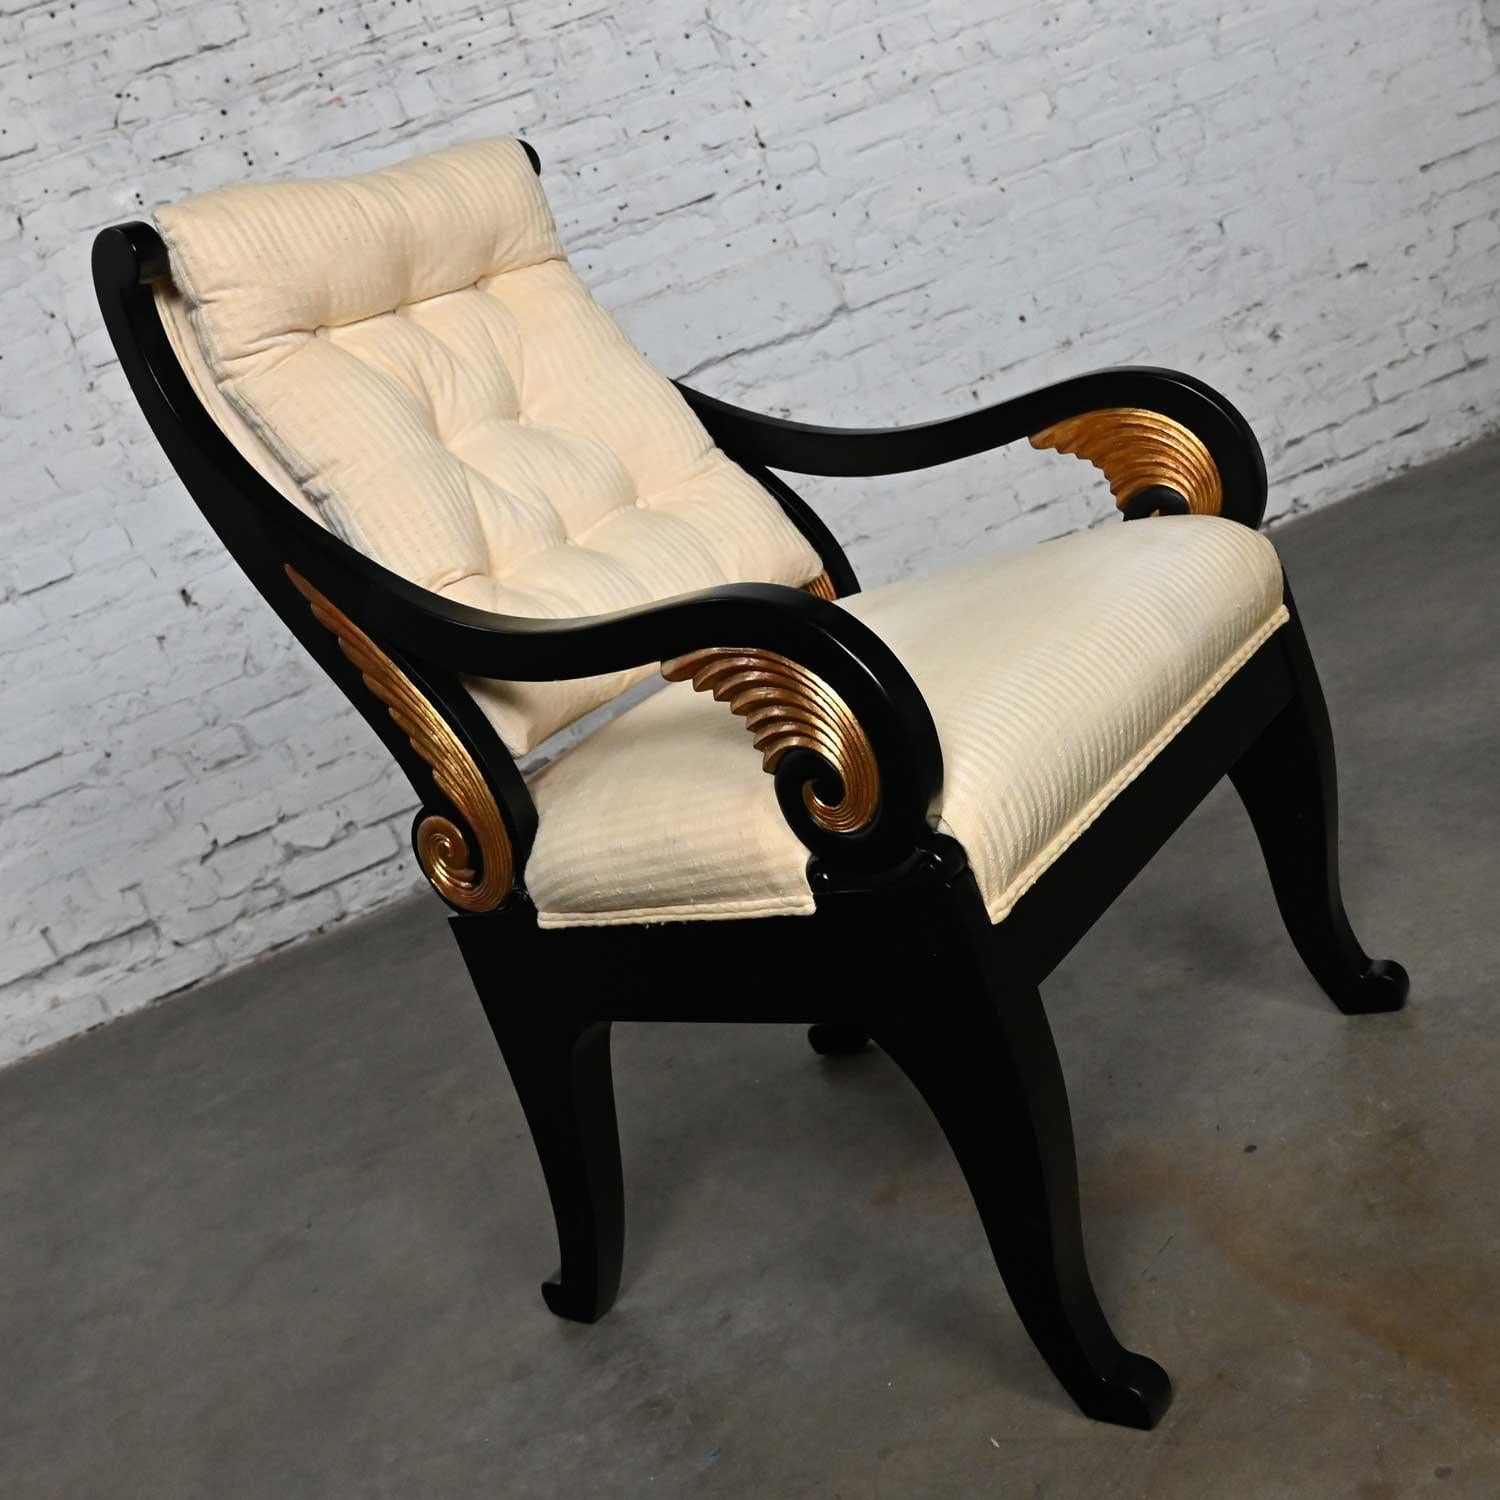 Fabulous vintage neoclassic revival side chair with a black painted frame, gilt wing accents and off-white upholstery fabric. Beautiful condition, keeping in mind that this is vintage and not new so will have signs of use and wear. The frame has